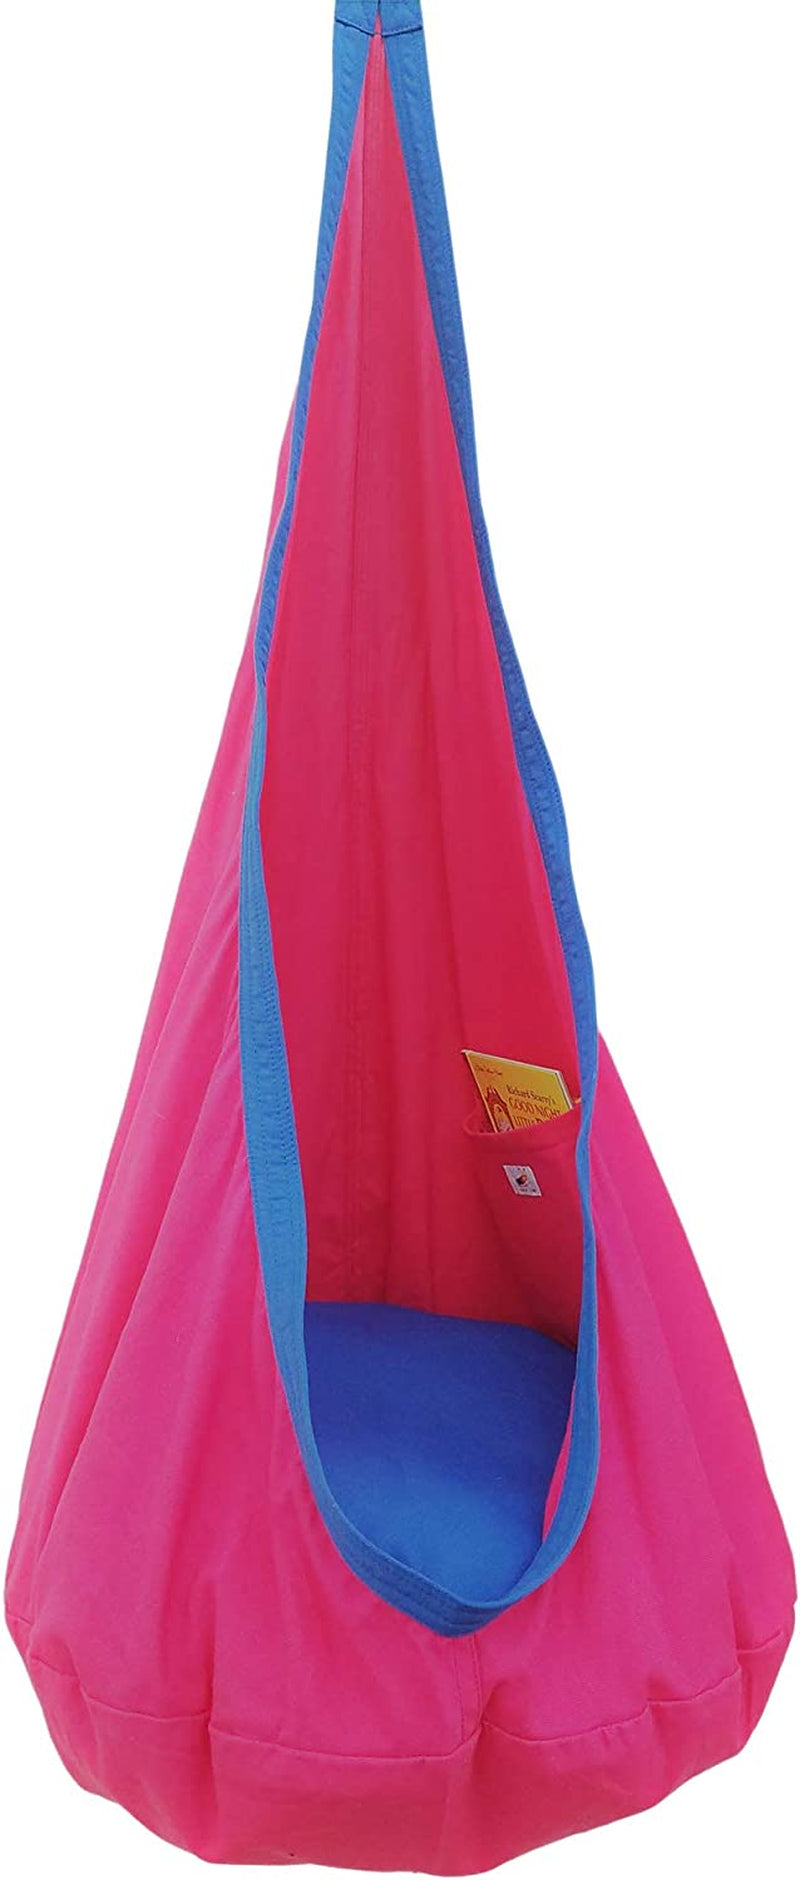 Appomattox Kids, Kids Child Hanging Pod Swing Chair with Pocket, Hanging Hammock Cocoon, Indoor and Outdoor Fun, Reading Nook, Relaxation, Sensory Autism Therapy, Easy to Hang Comfortable Nest, Girls and Boys (Pink)